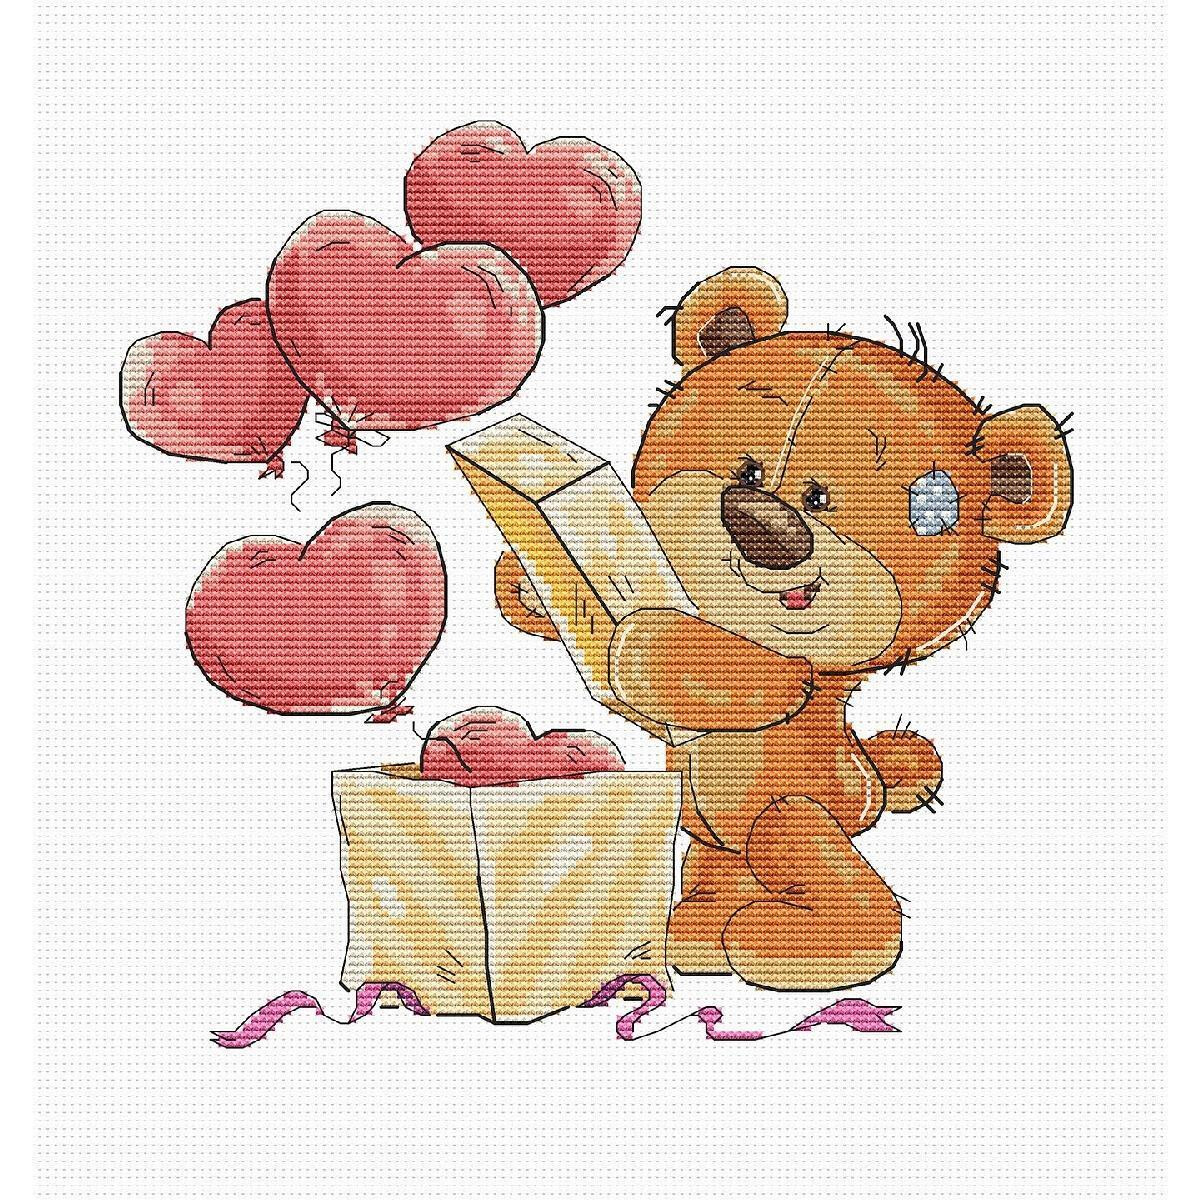 An embroidery of a cute brown bear holding an envelope...